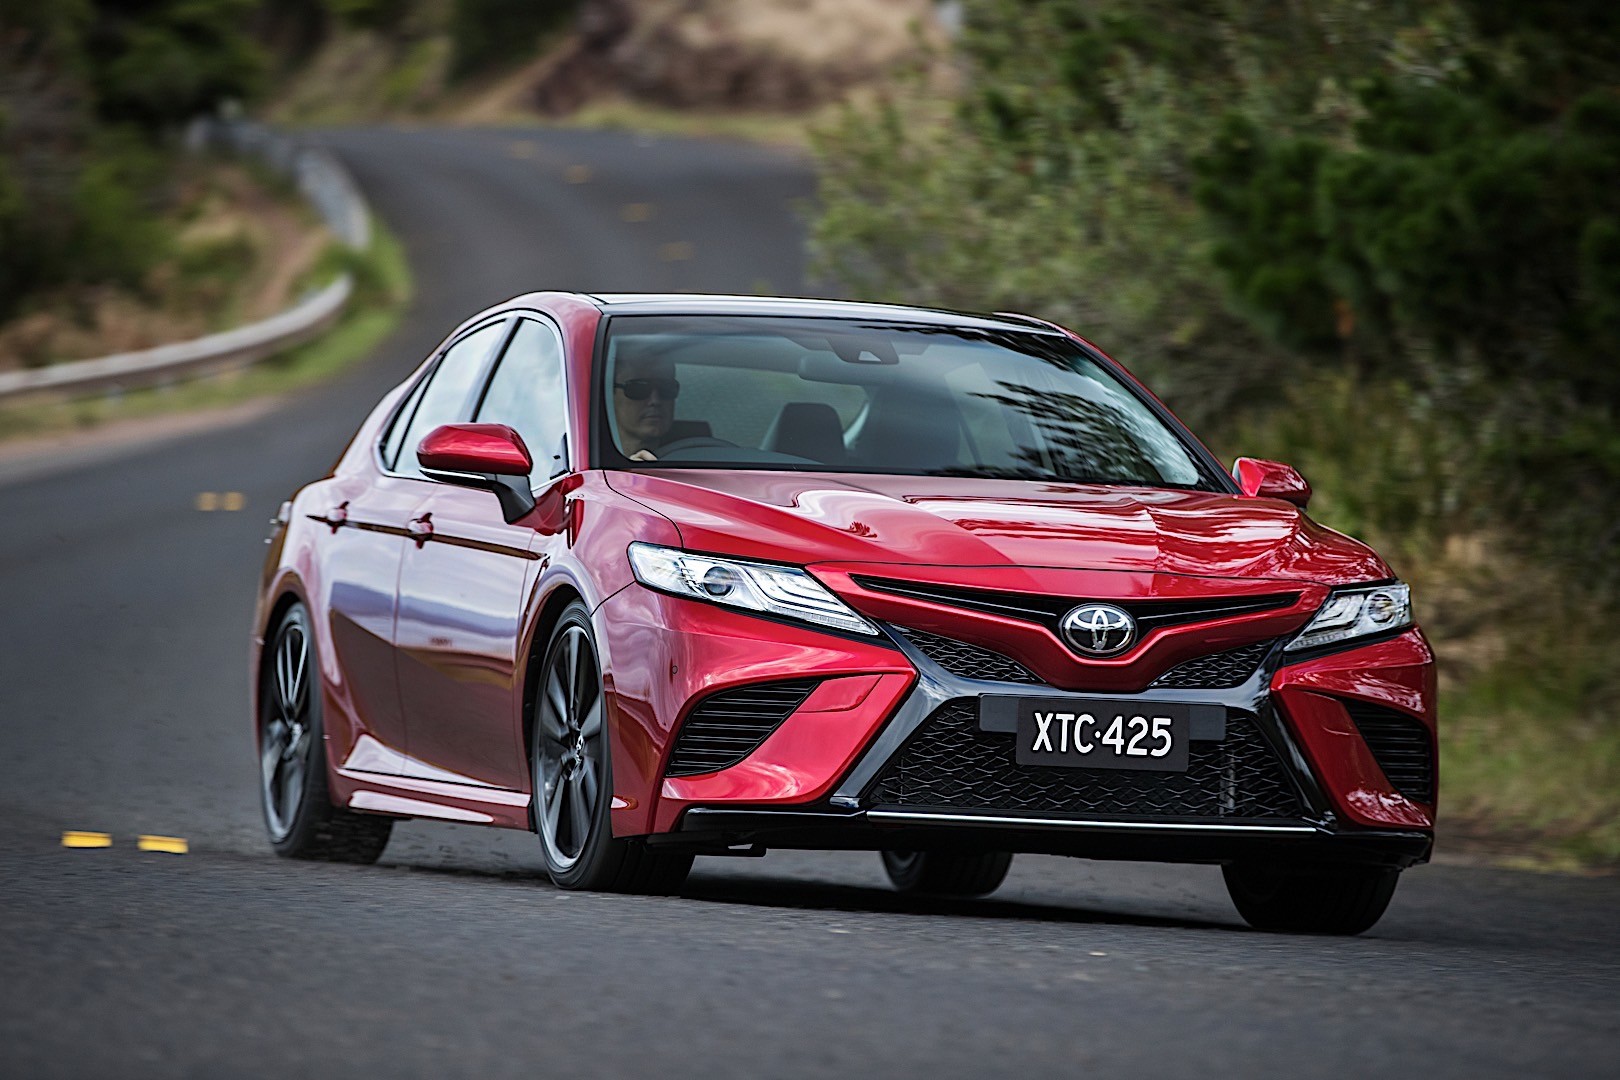 54 HQ Pictures Toyota Camry Sport 2018 - 2018 Toyota Camry Has the Most Standard Horsepower Among ...